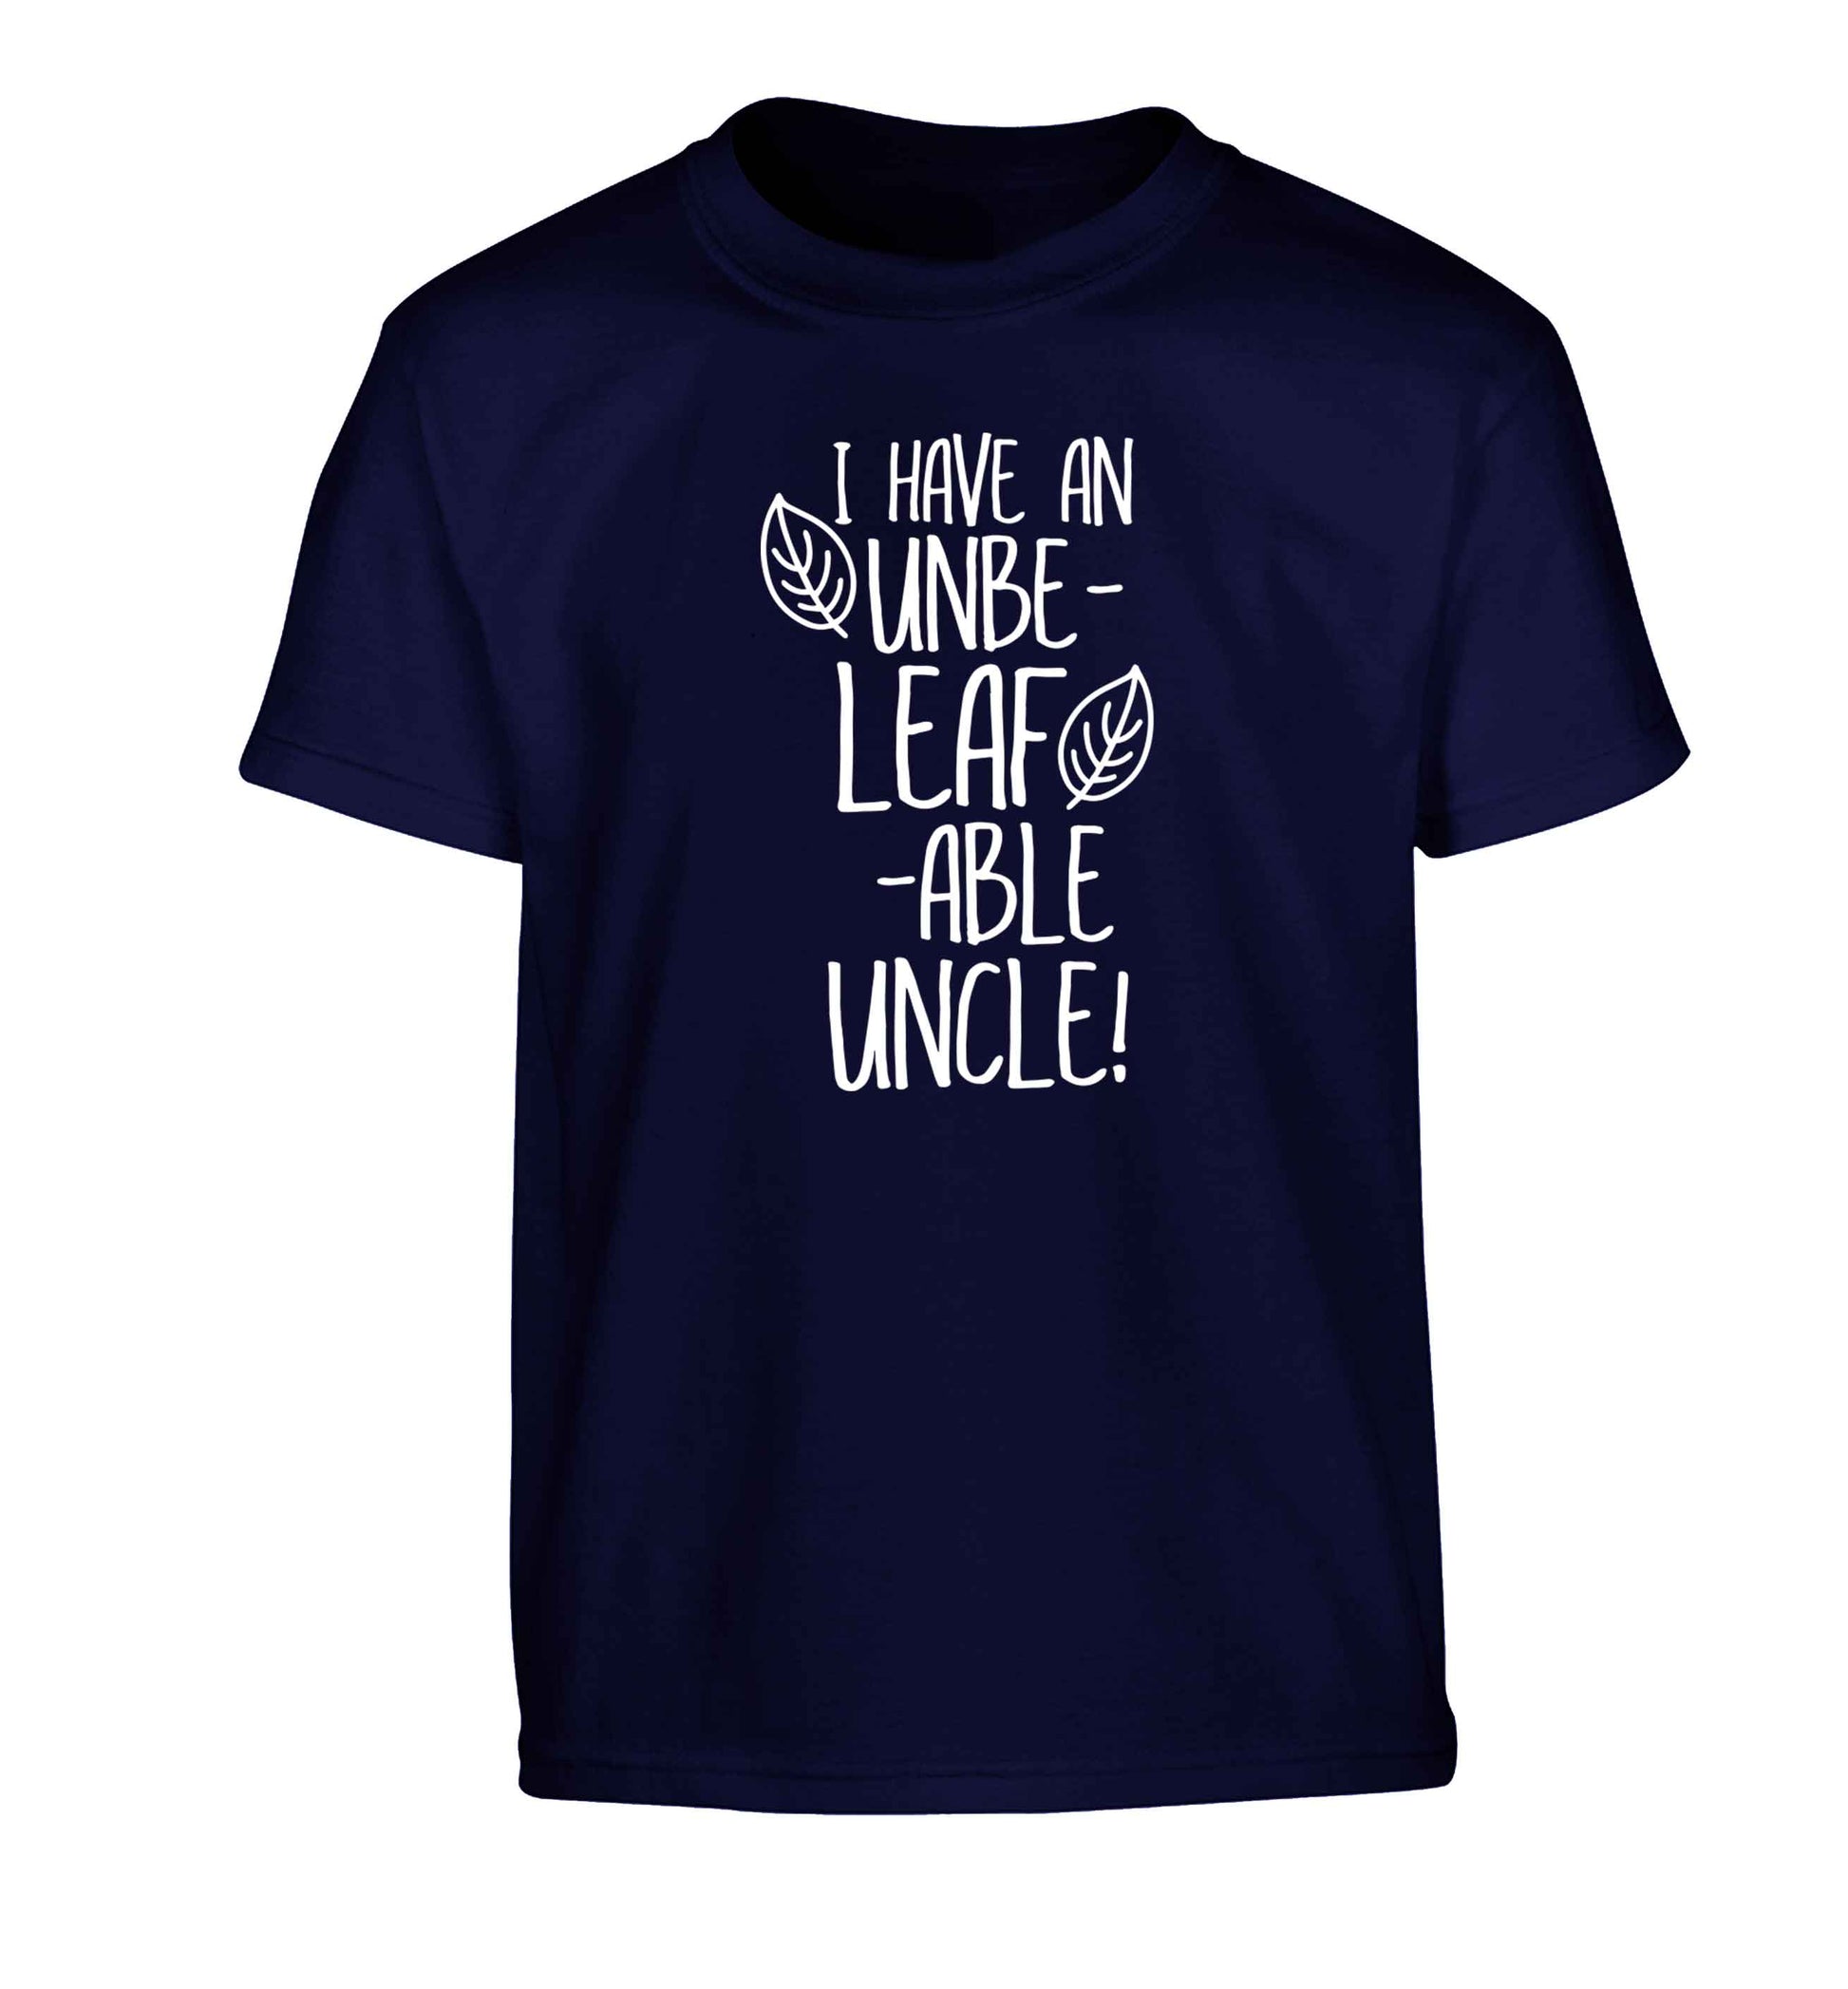 I have an unbe-leaf-able uncle Children's navy Tshirt 12-13 Years